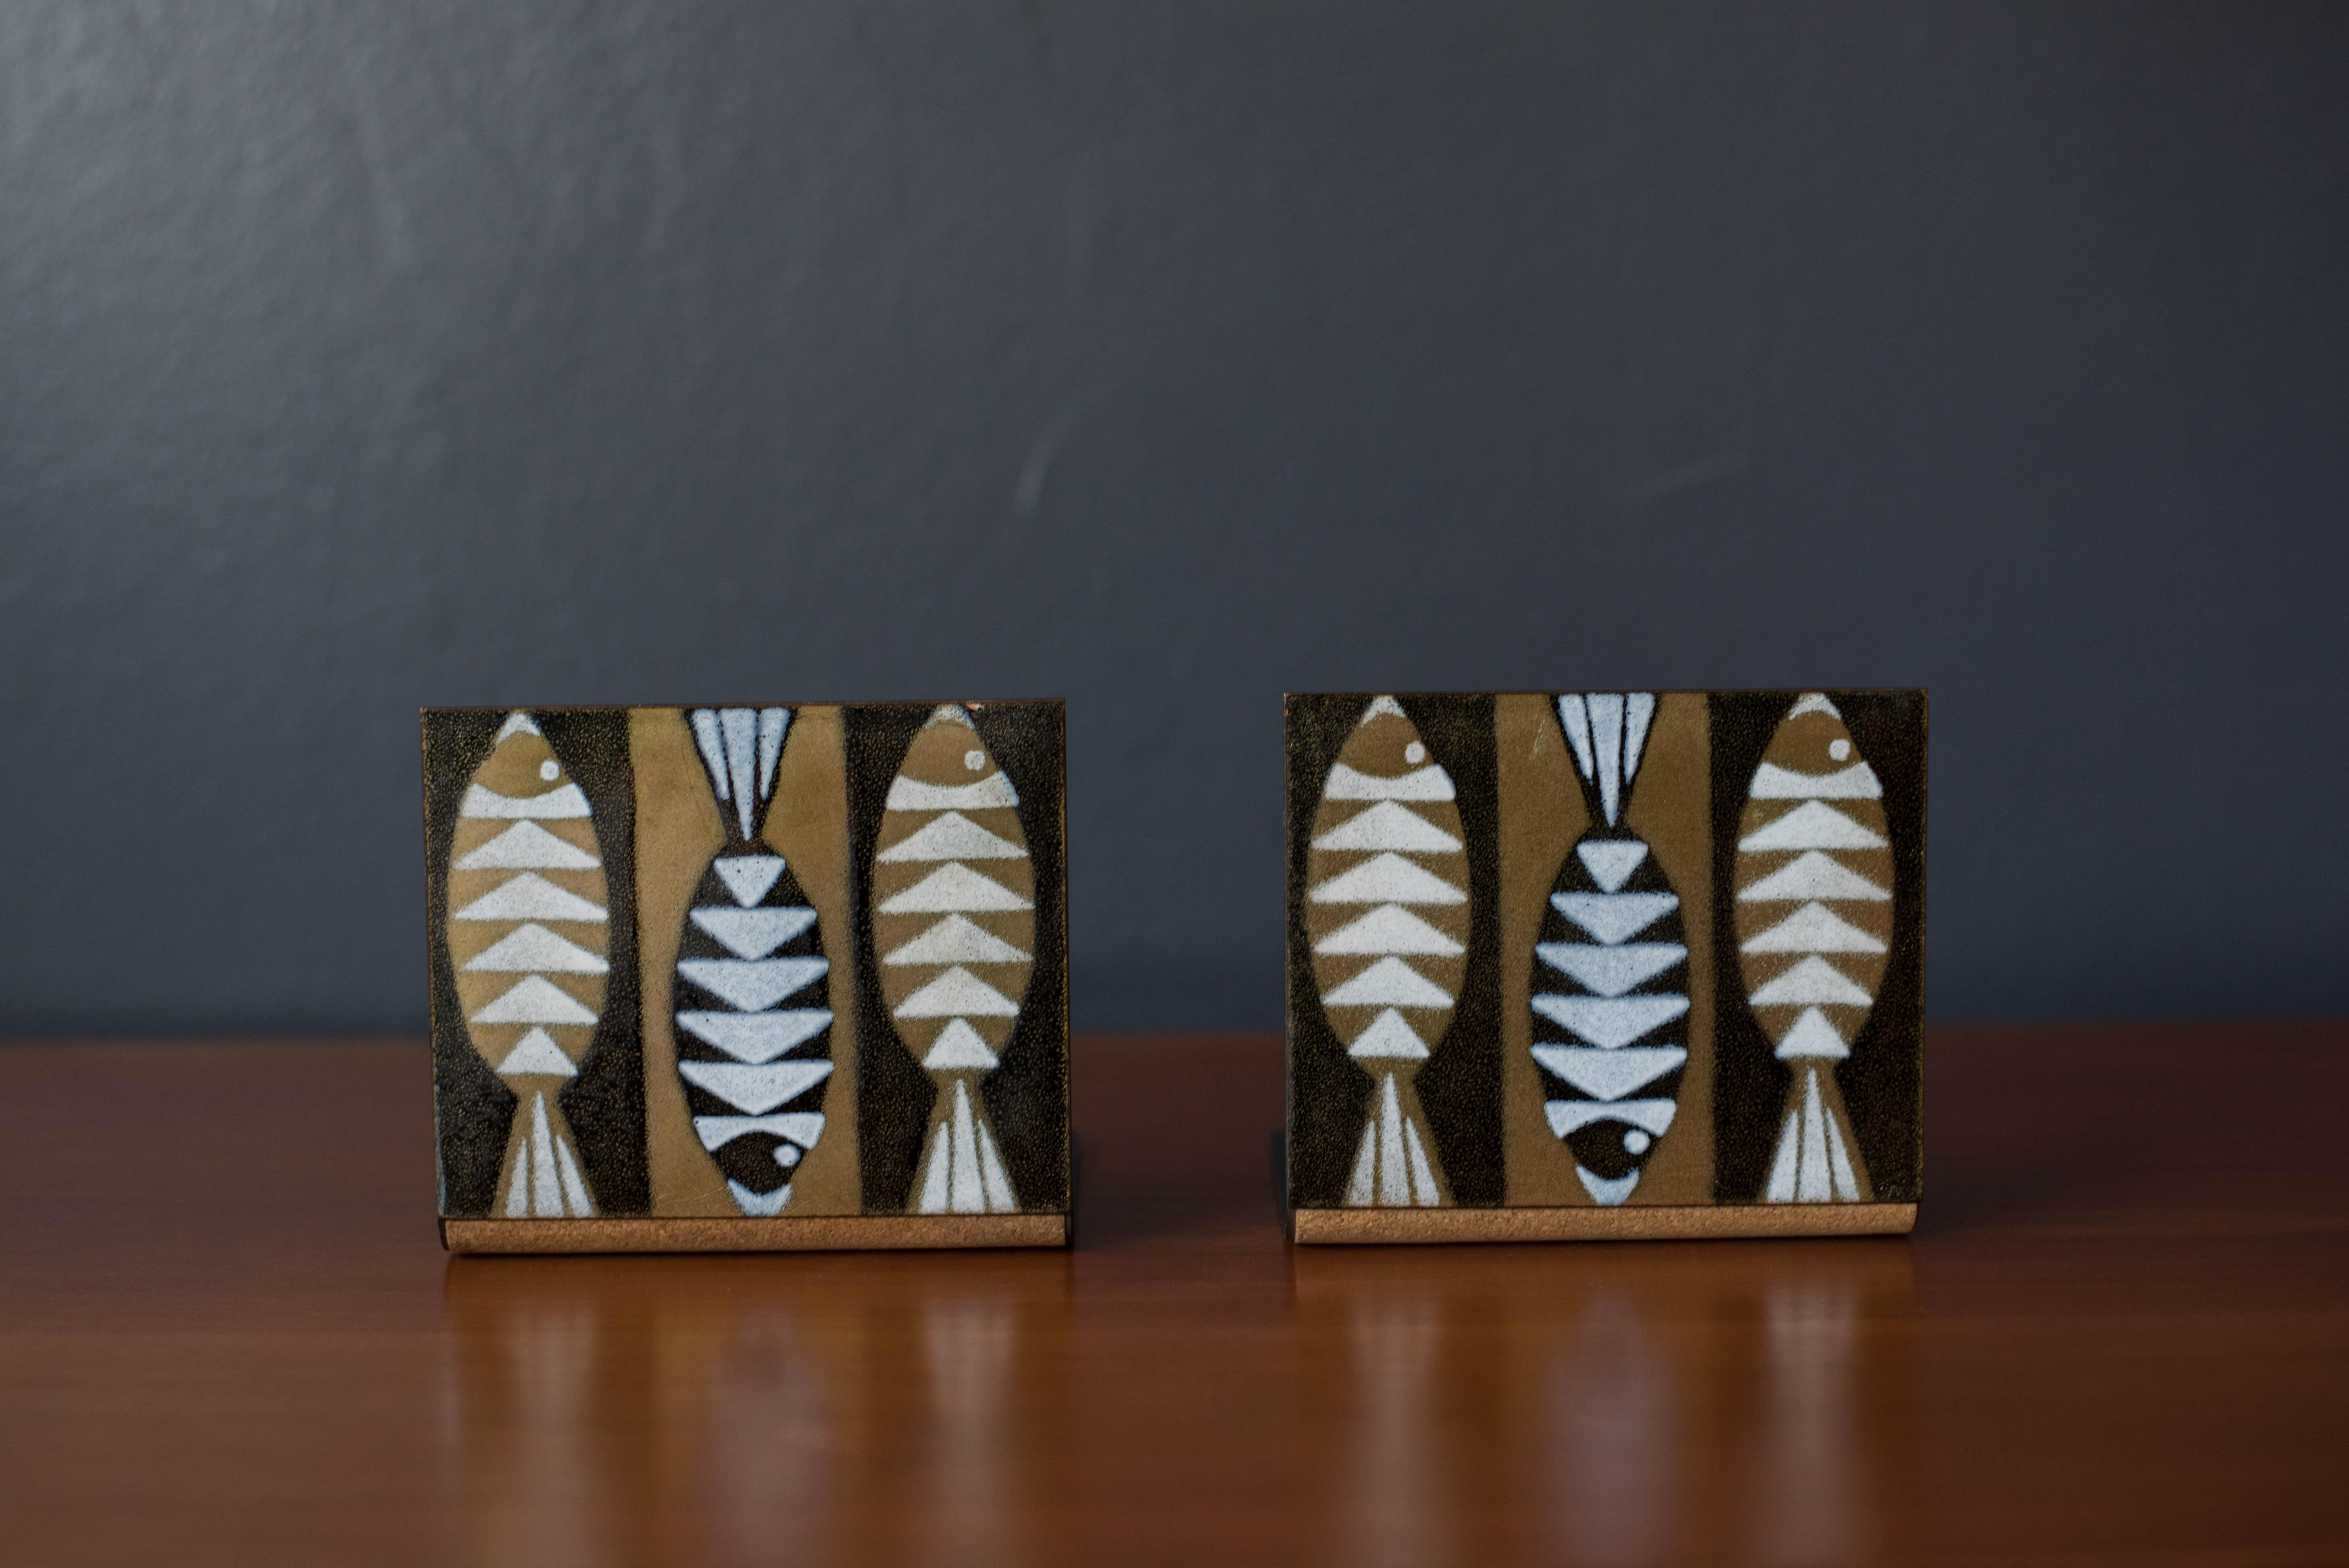 Mid-Century Modern pair of decorative fish bookends designed by Robert Wuersch Associates c. 1960's. This set features contrasting tones of gold, black, and white in a textured metal enamel finish. Equipped with cork bases to protect tabletop